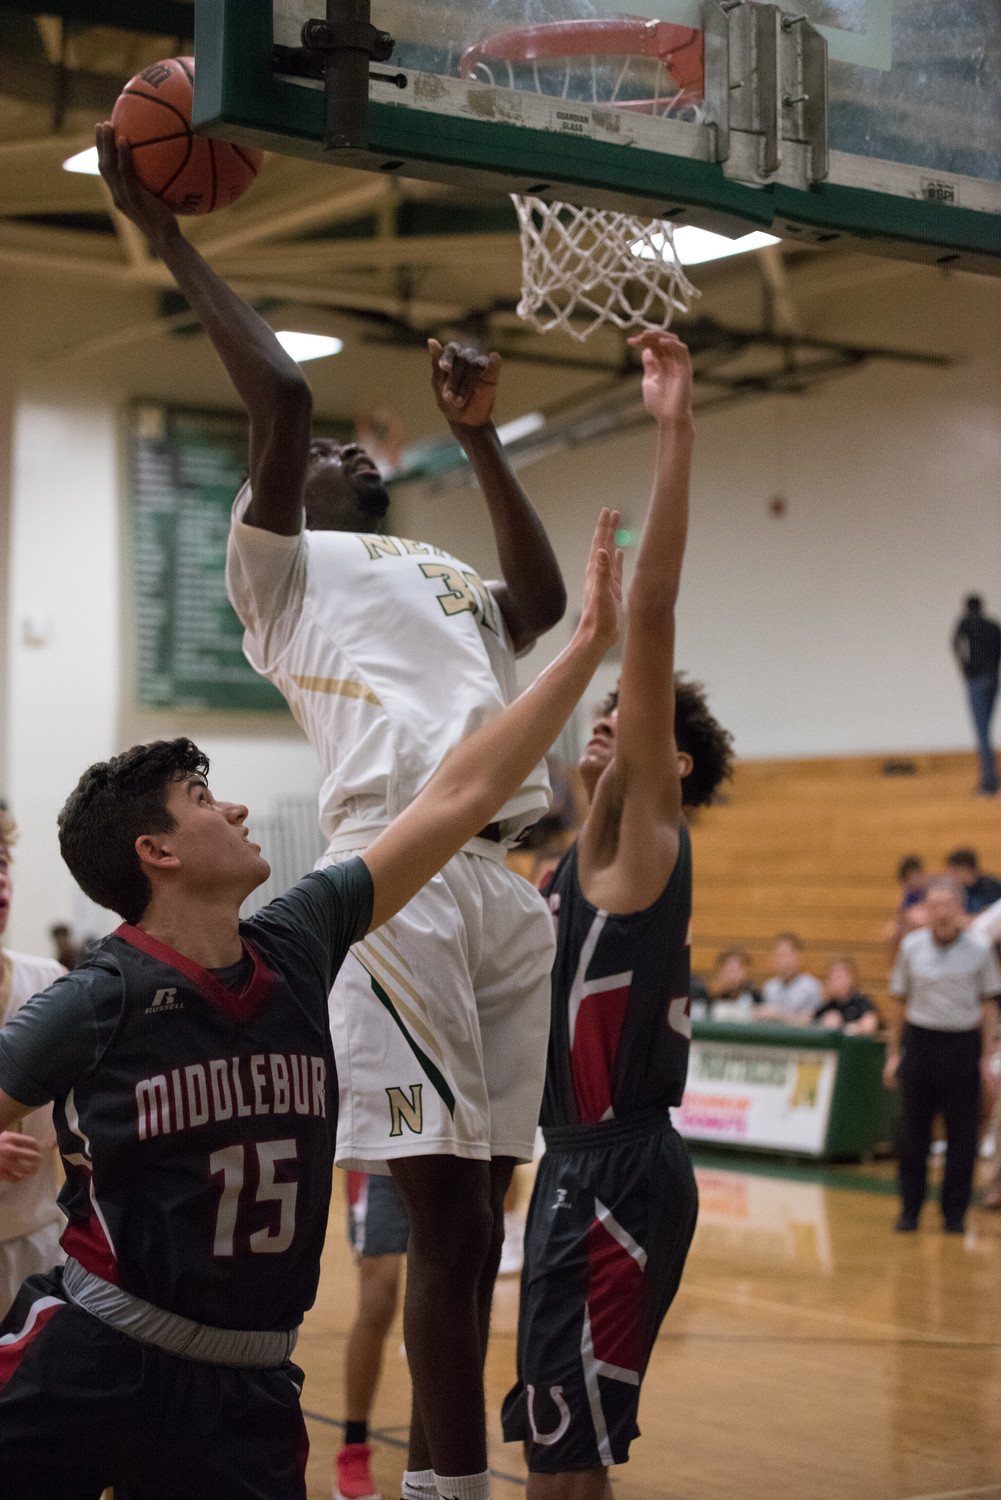 Nease's Aaron Cochran drives to the basket during a district 3-7A matchup against Middleburg. Cochran scored 14 points in the win.